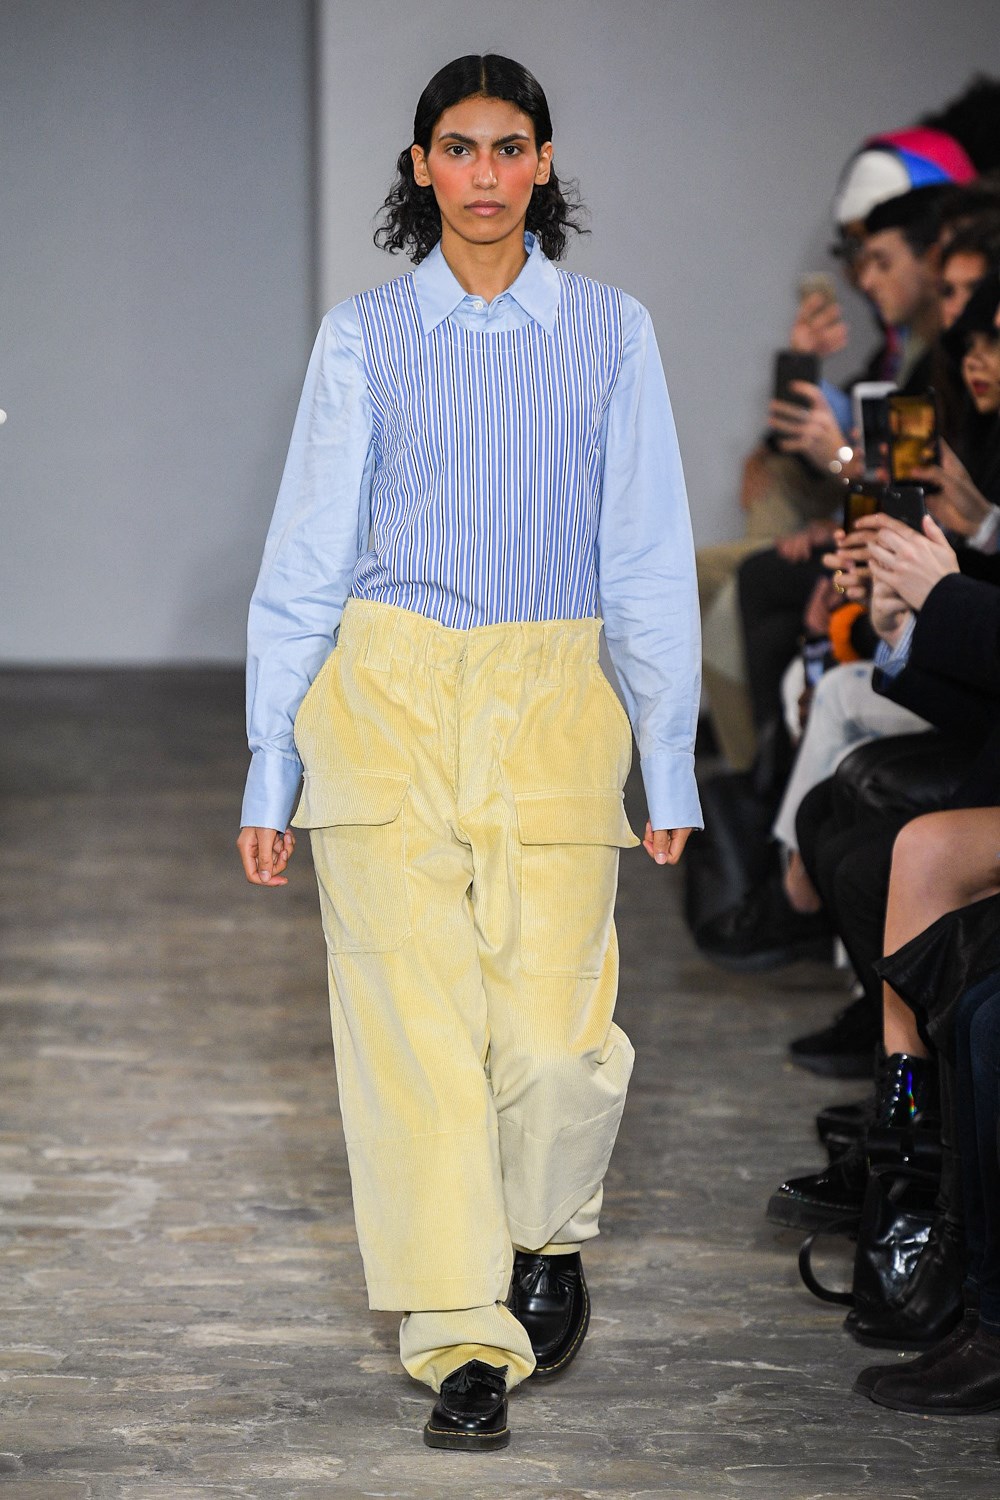 Deconstructed Fall 2020 Trend from Paris | The Impression